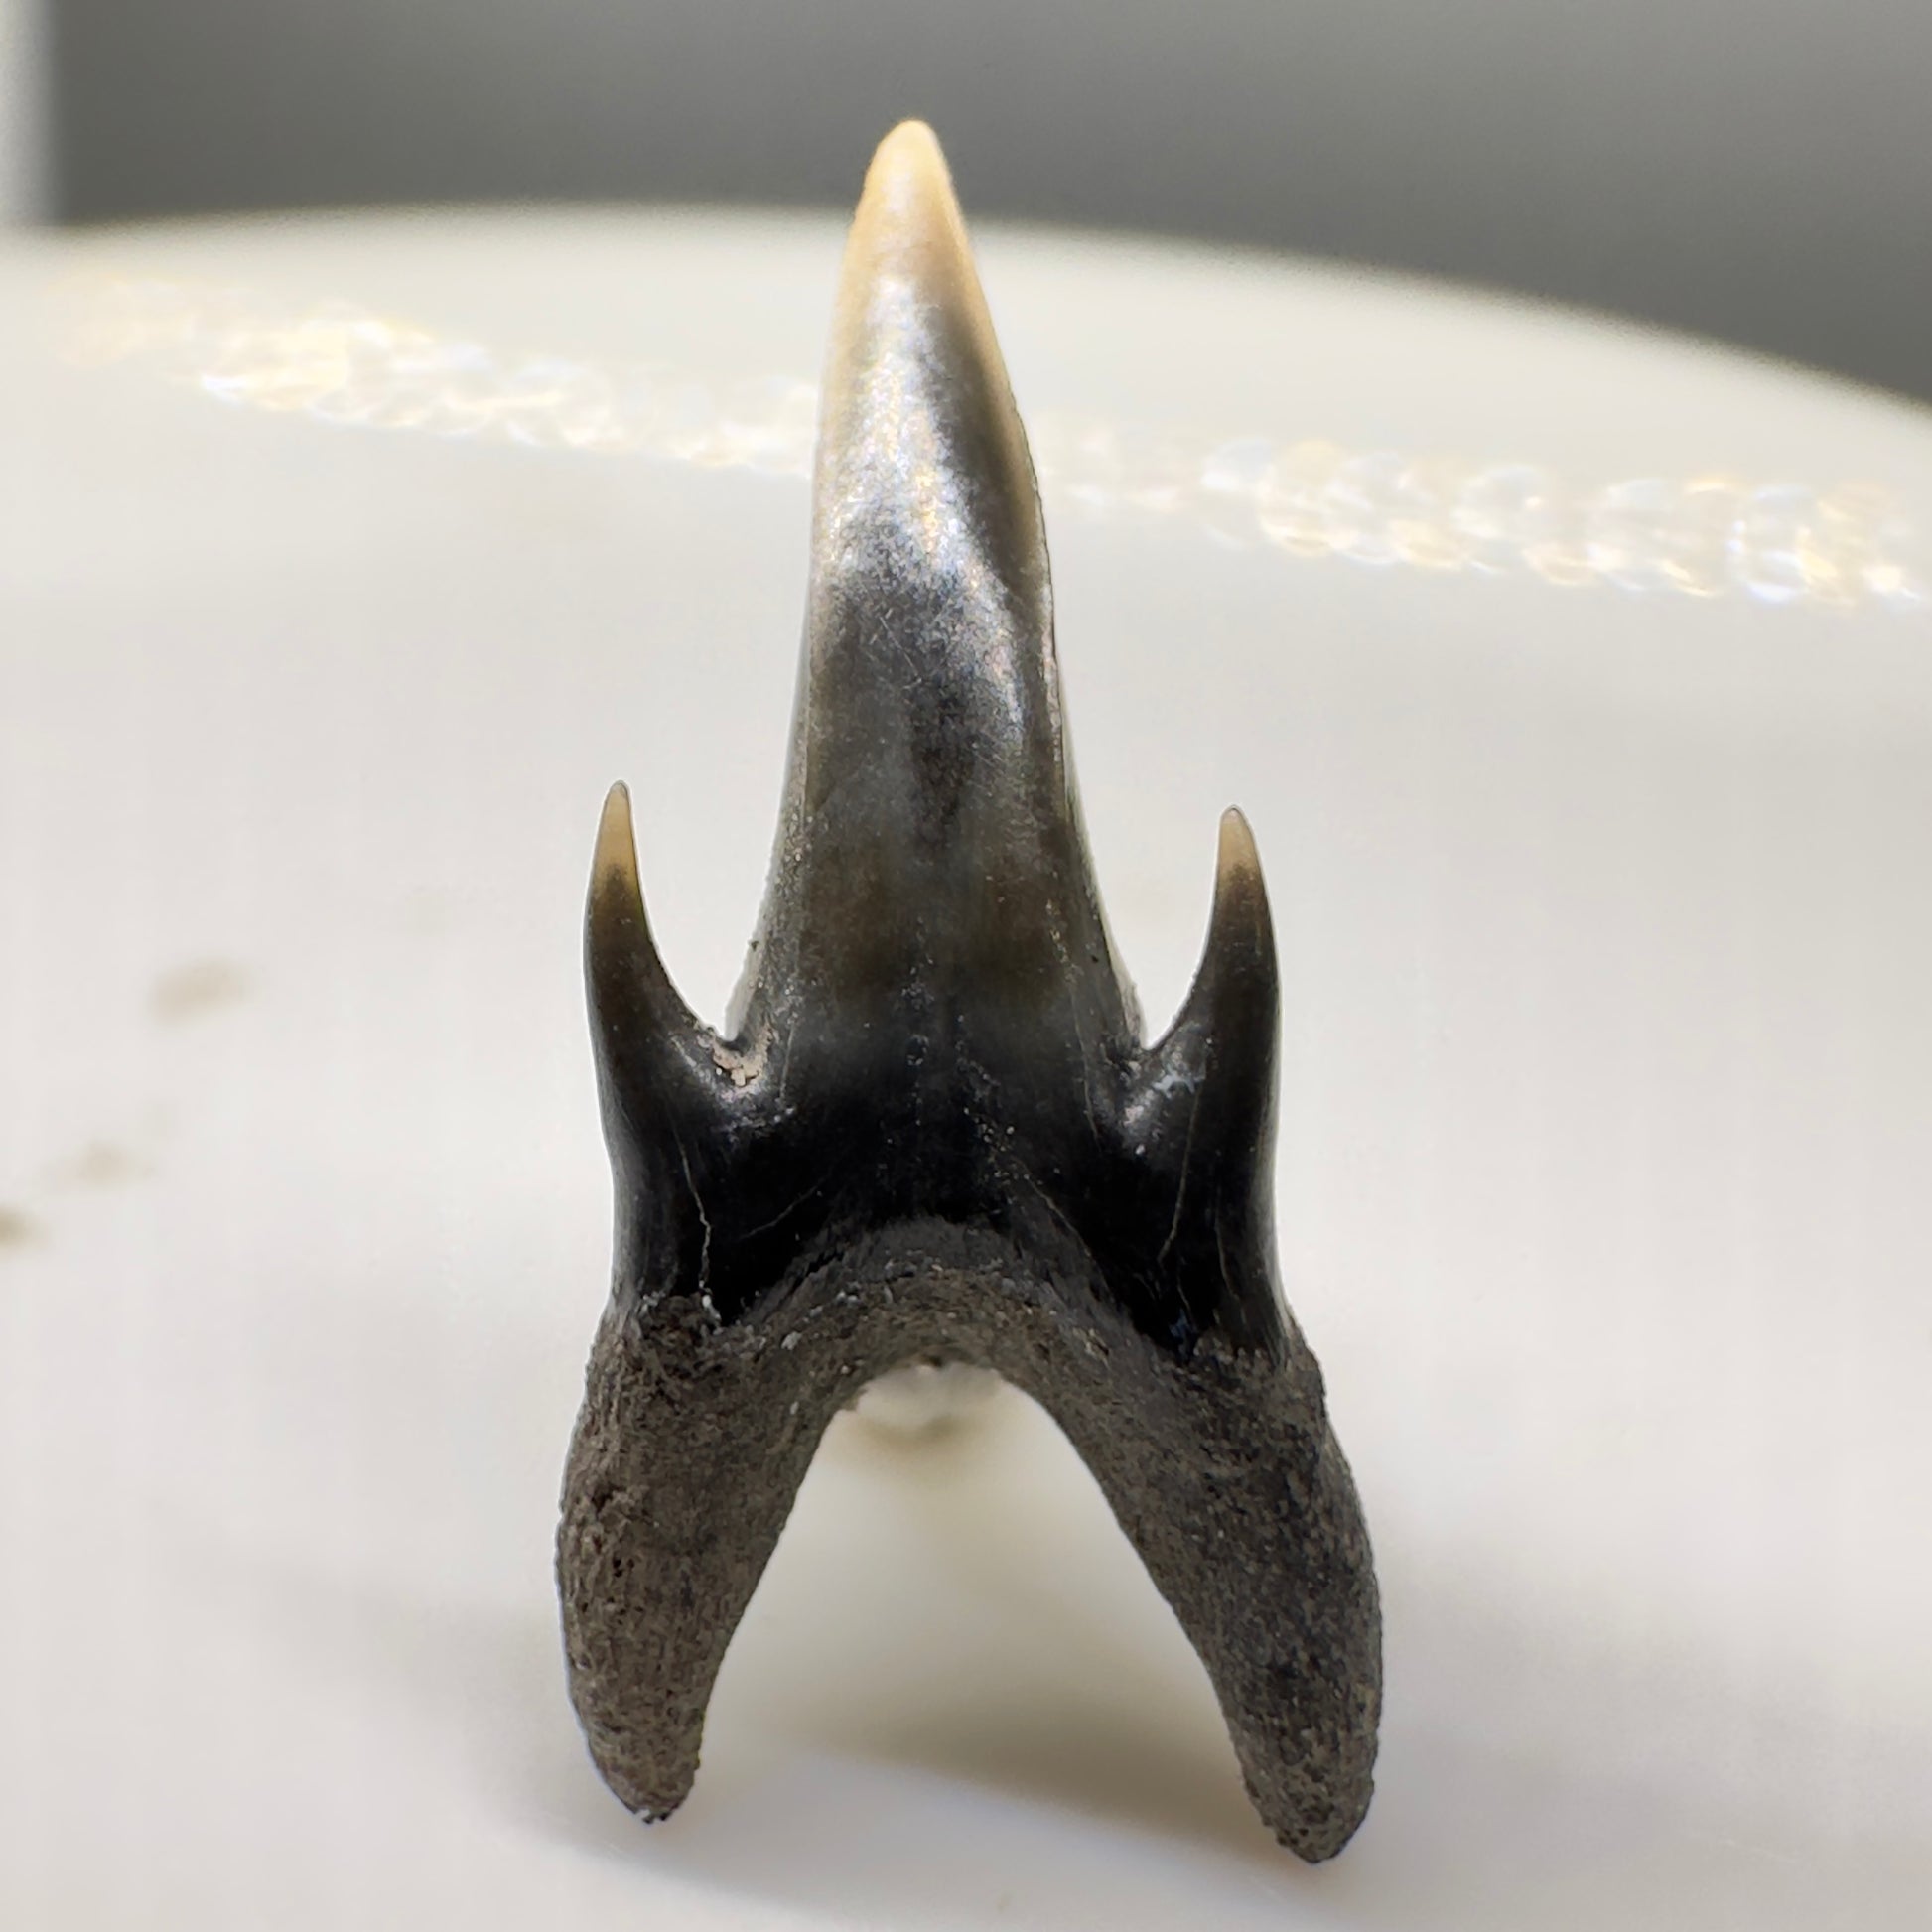 0.59" Fossil Extinct Sand Tiger Shark tooth from Stafford Co., Va - Very rare R535 - Back